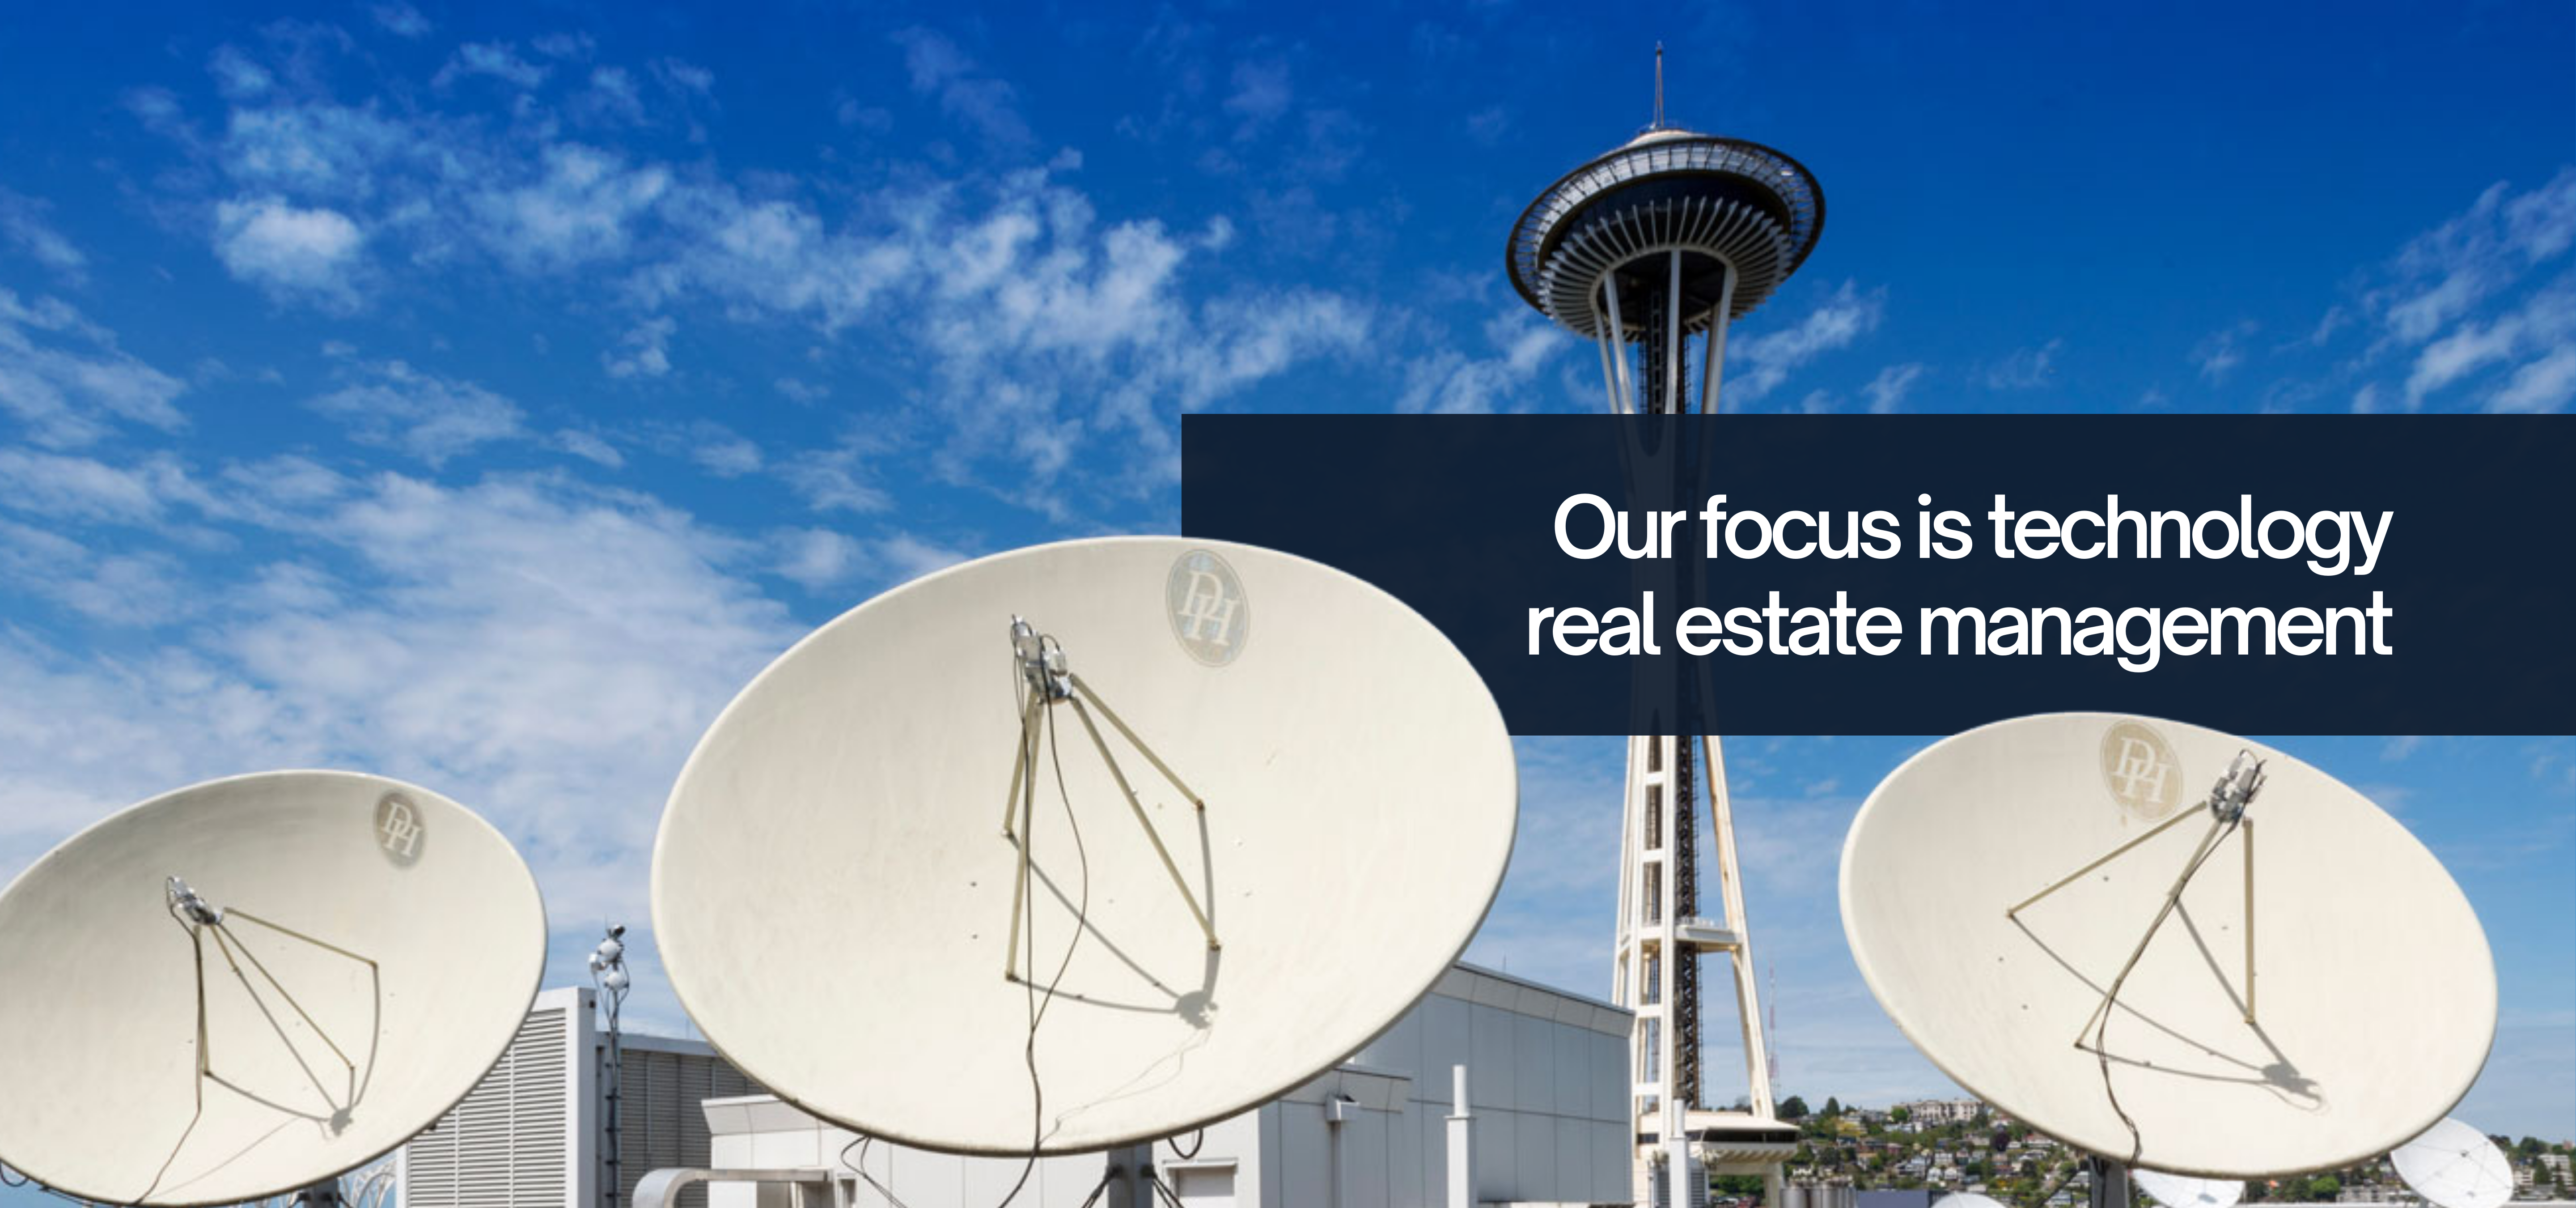 Our focus is technology real estate management